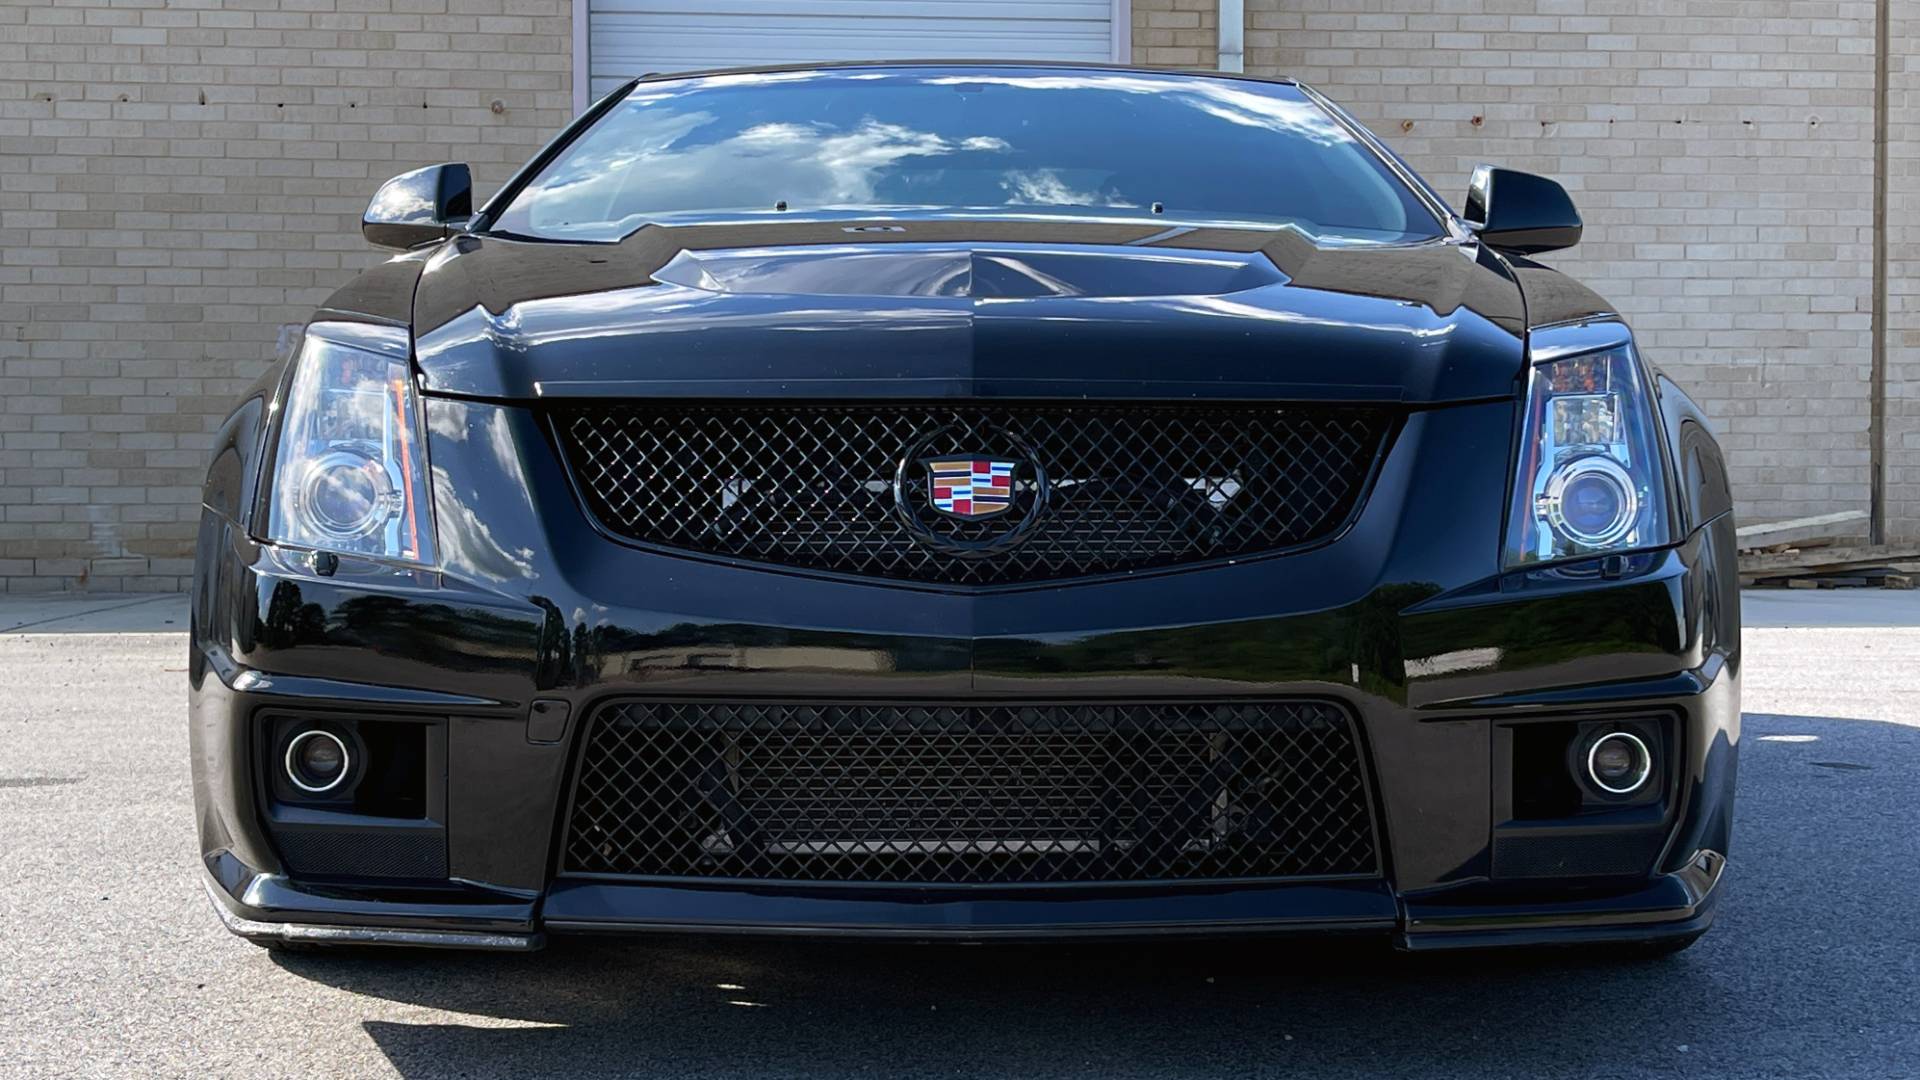 Used 2011 Cadillac CTS-V COUPE 6.2L 600HP+ / NAV / BOSE / SUNROOF / RECARO / 19IN WHLS / REARVIEW for sale $39,995 at Formula Imports in Charlotte NC 28227 6